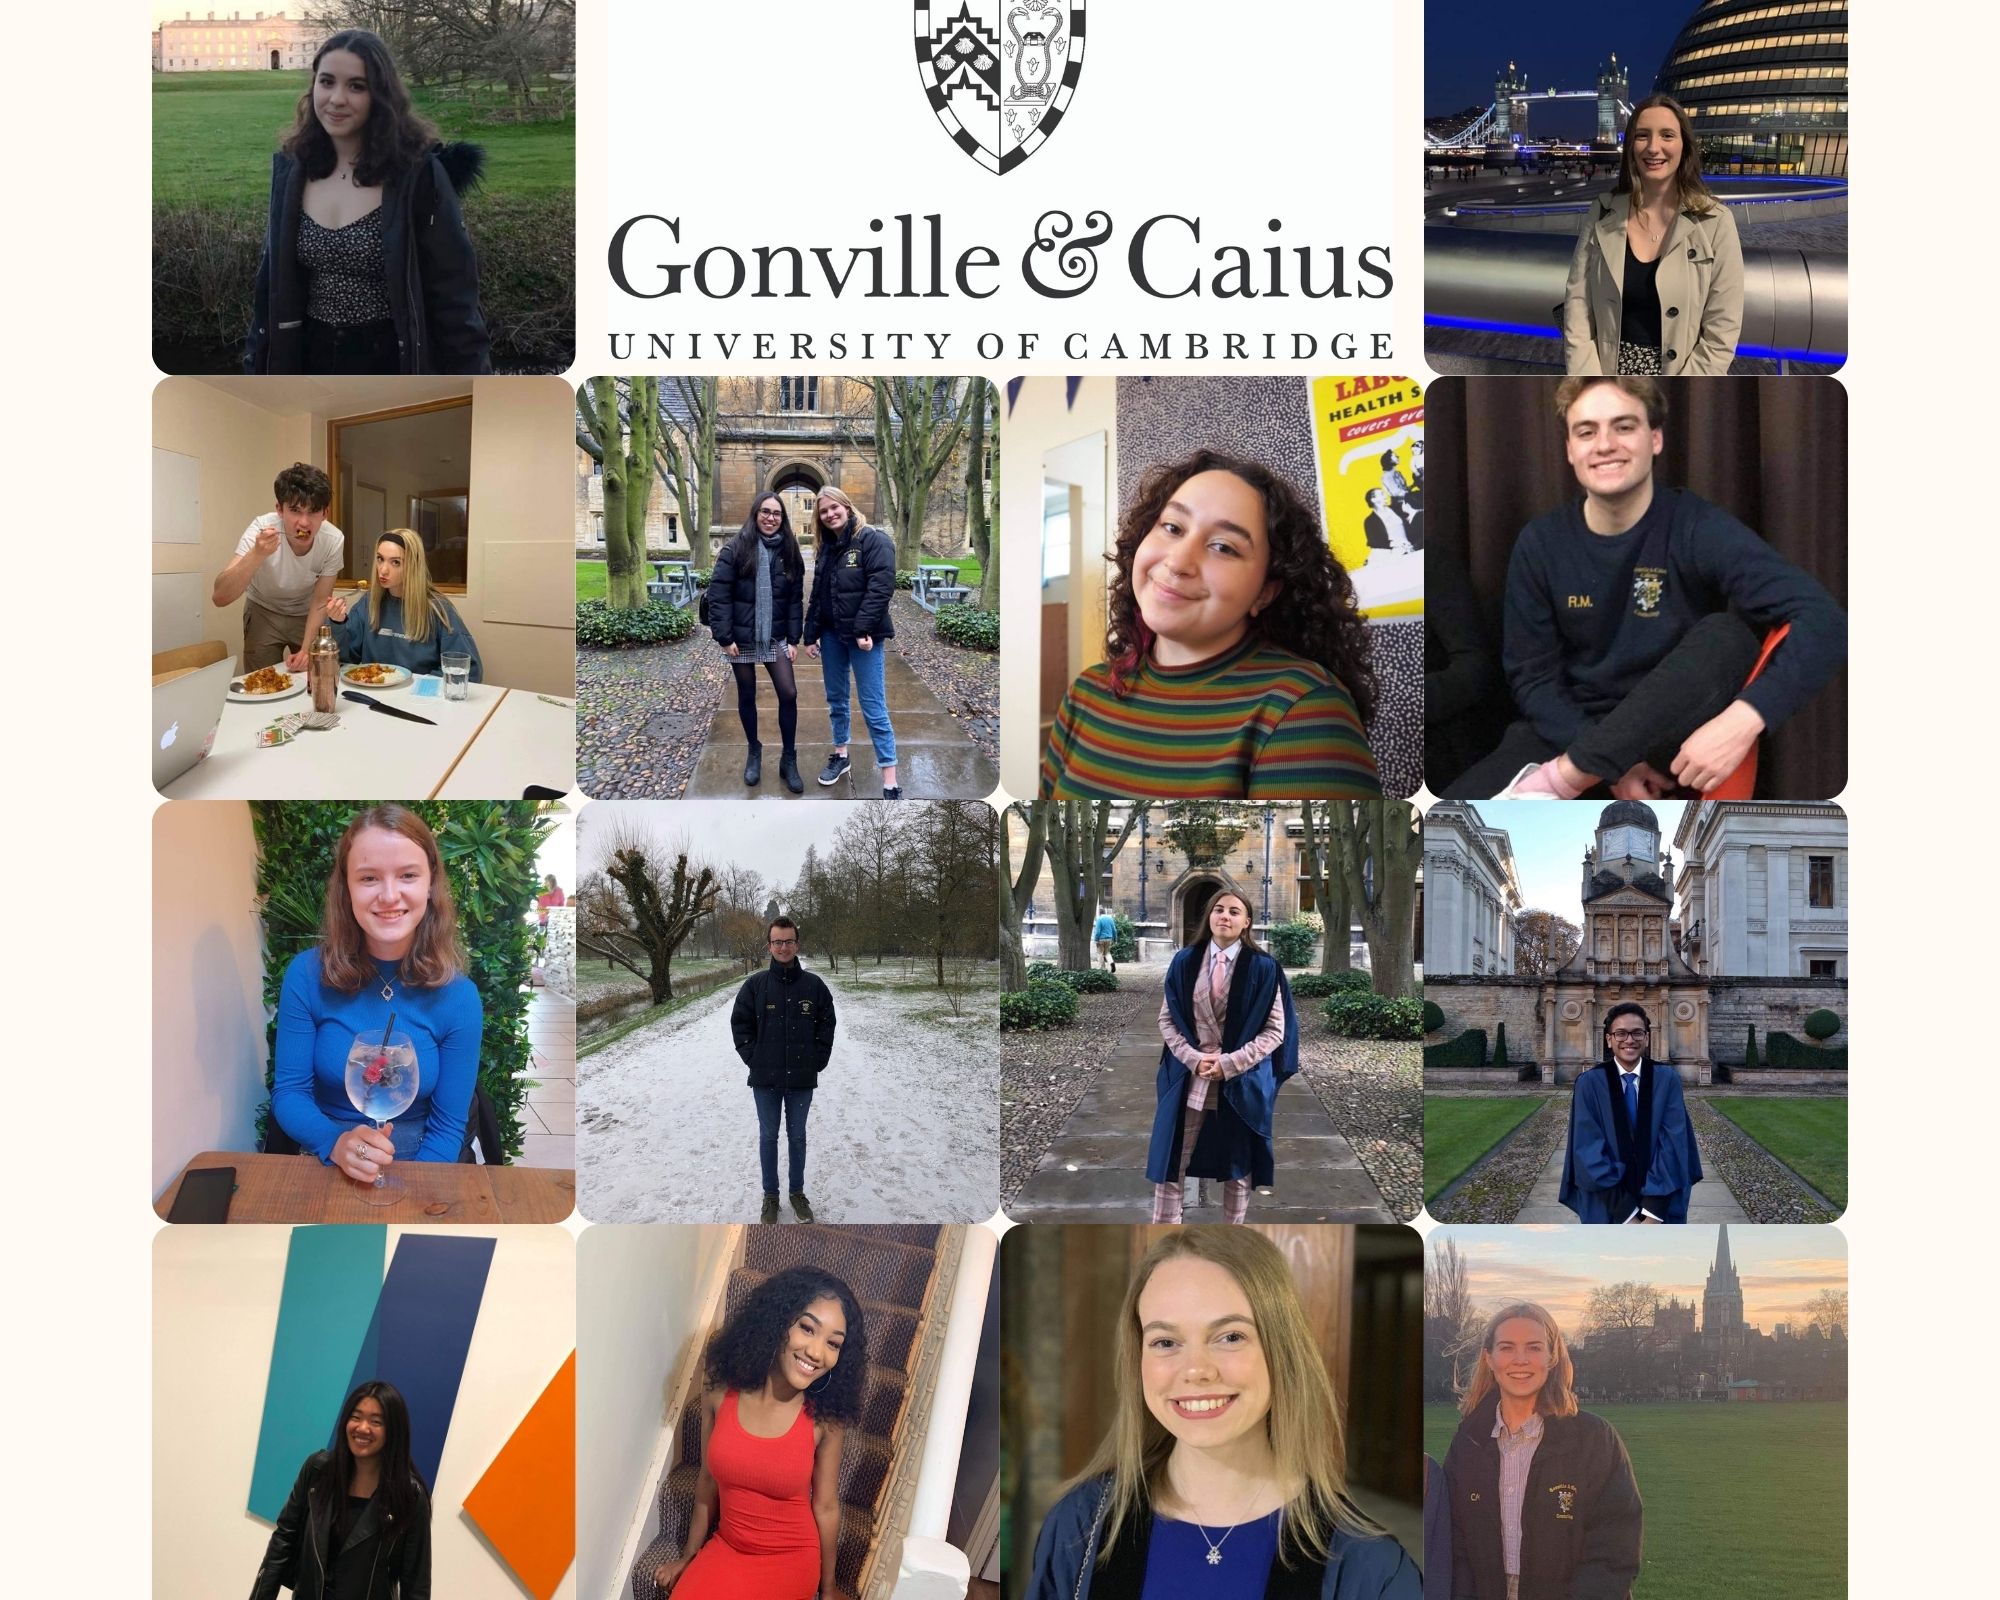 The Gonville & Caius Students Union committee for 2021-22